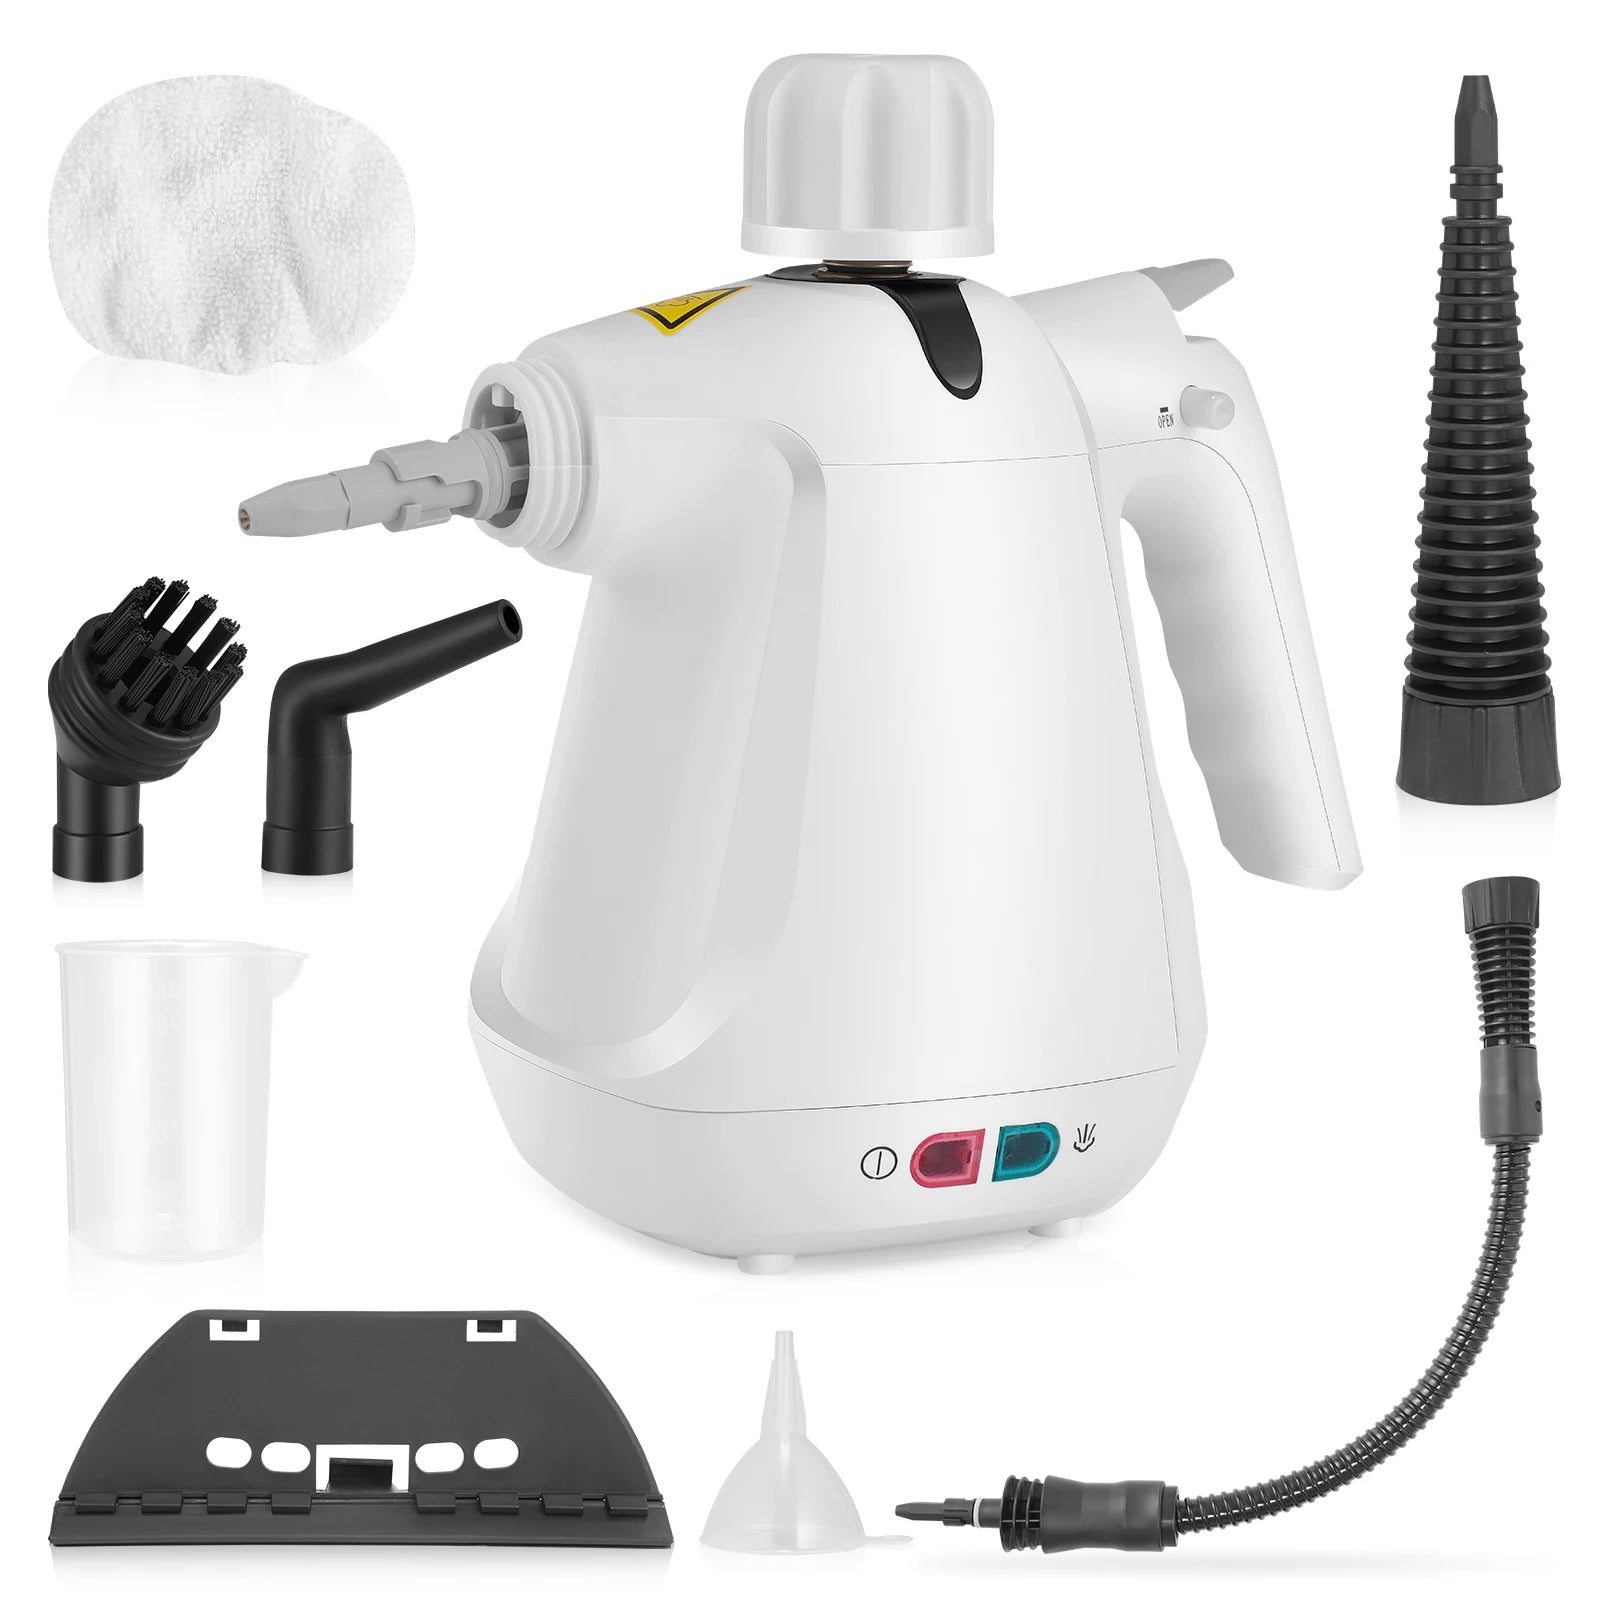 Handheld Steam Cleaner Upholstery Furniture 350 Ml Water Tank 3 Minutes Heating Time 10 Accessories Suitable For Kitchen Floor